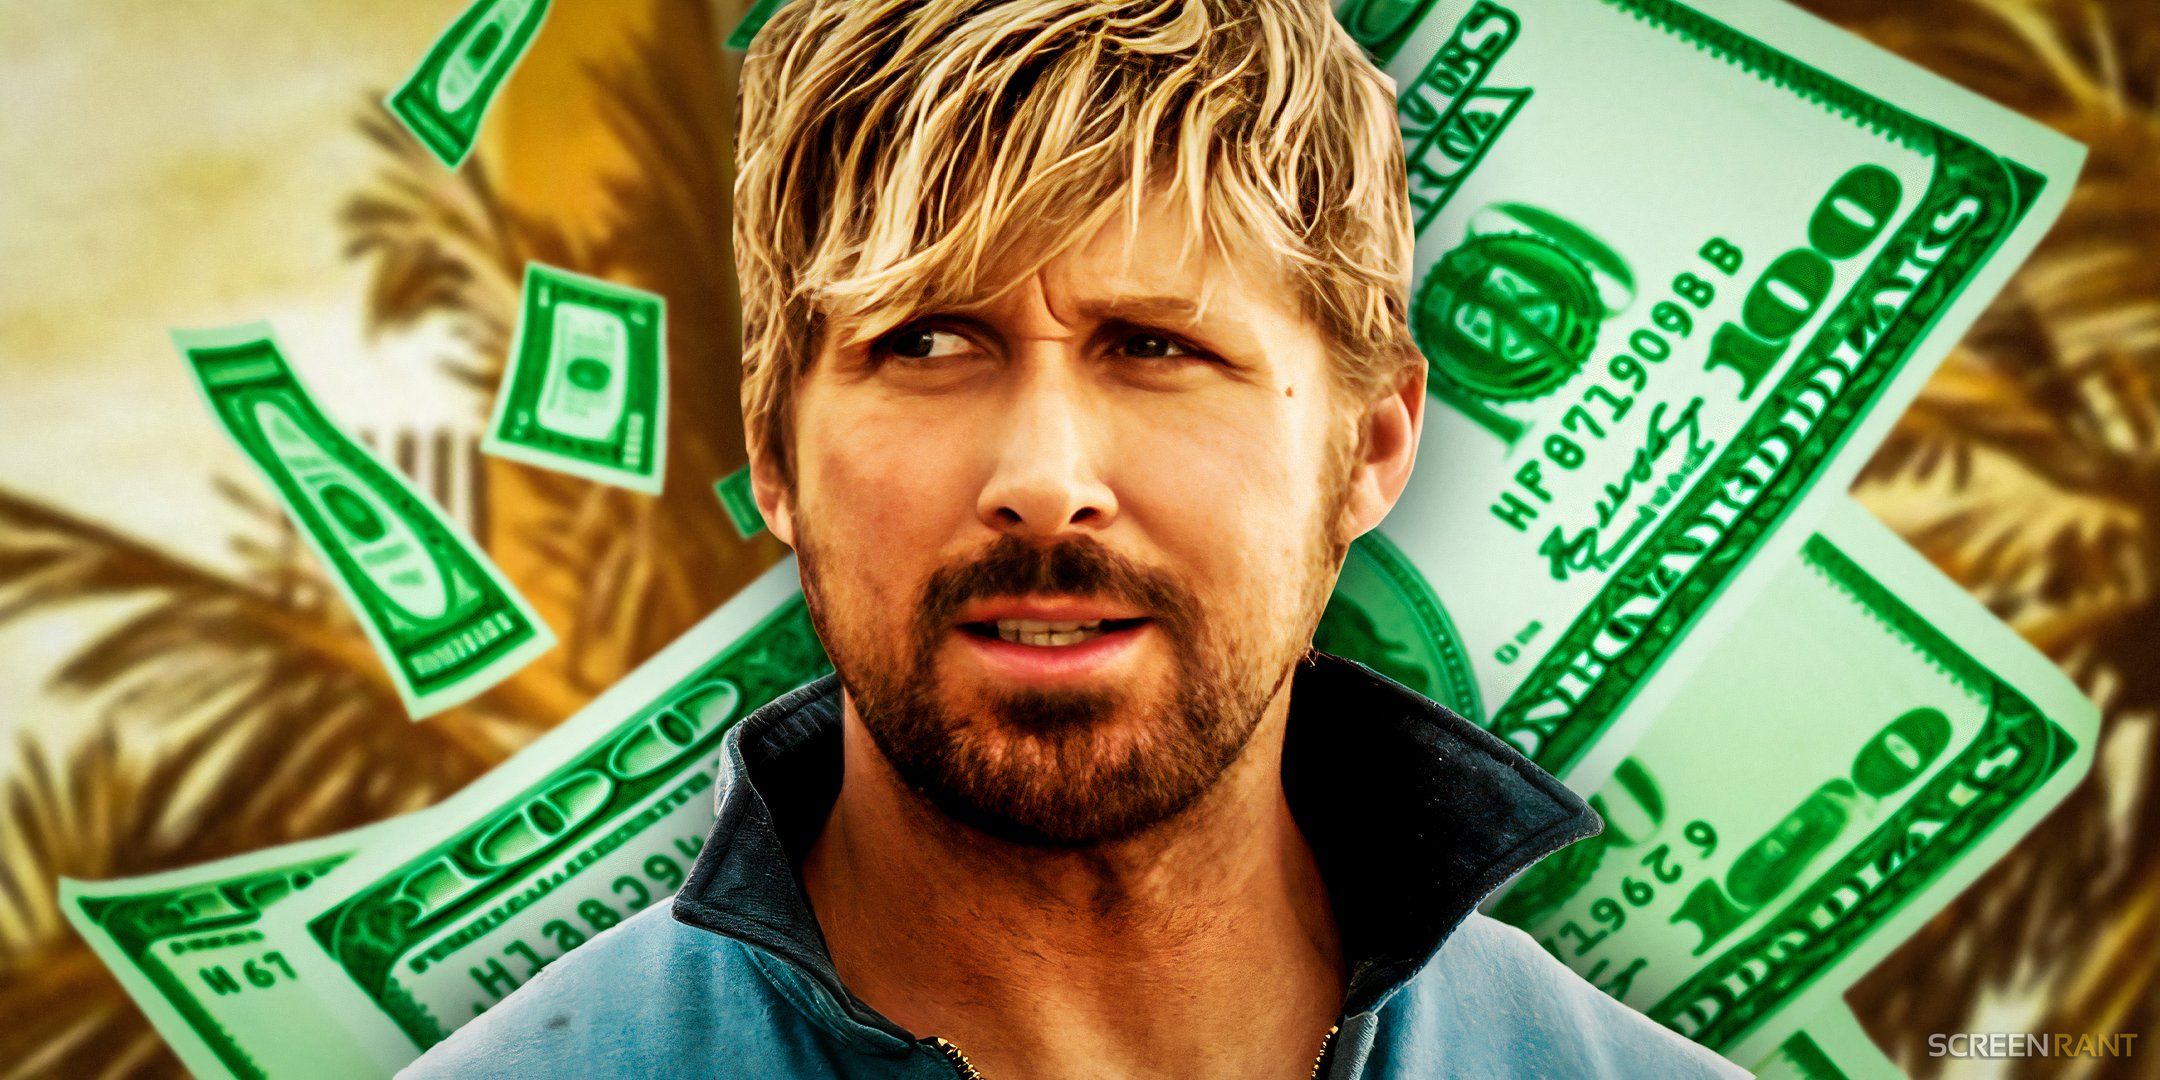 Ryan Gosling as Colt Seavers from The Fall Guy with money floating behind him